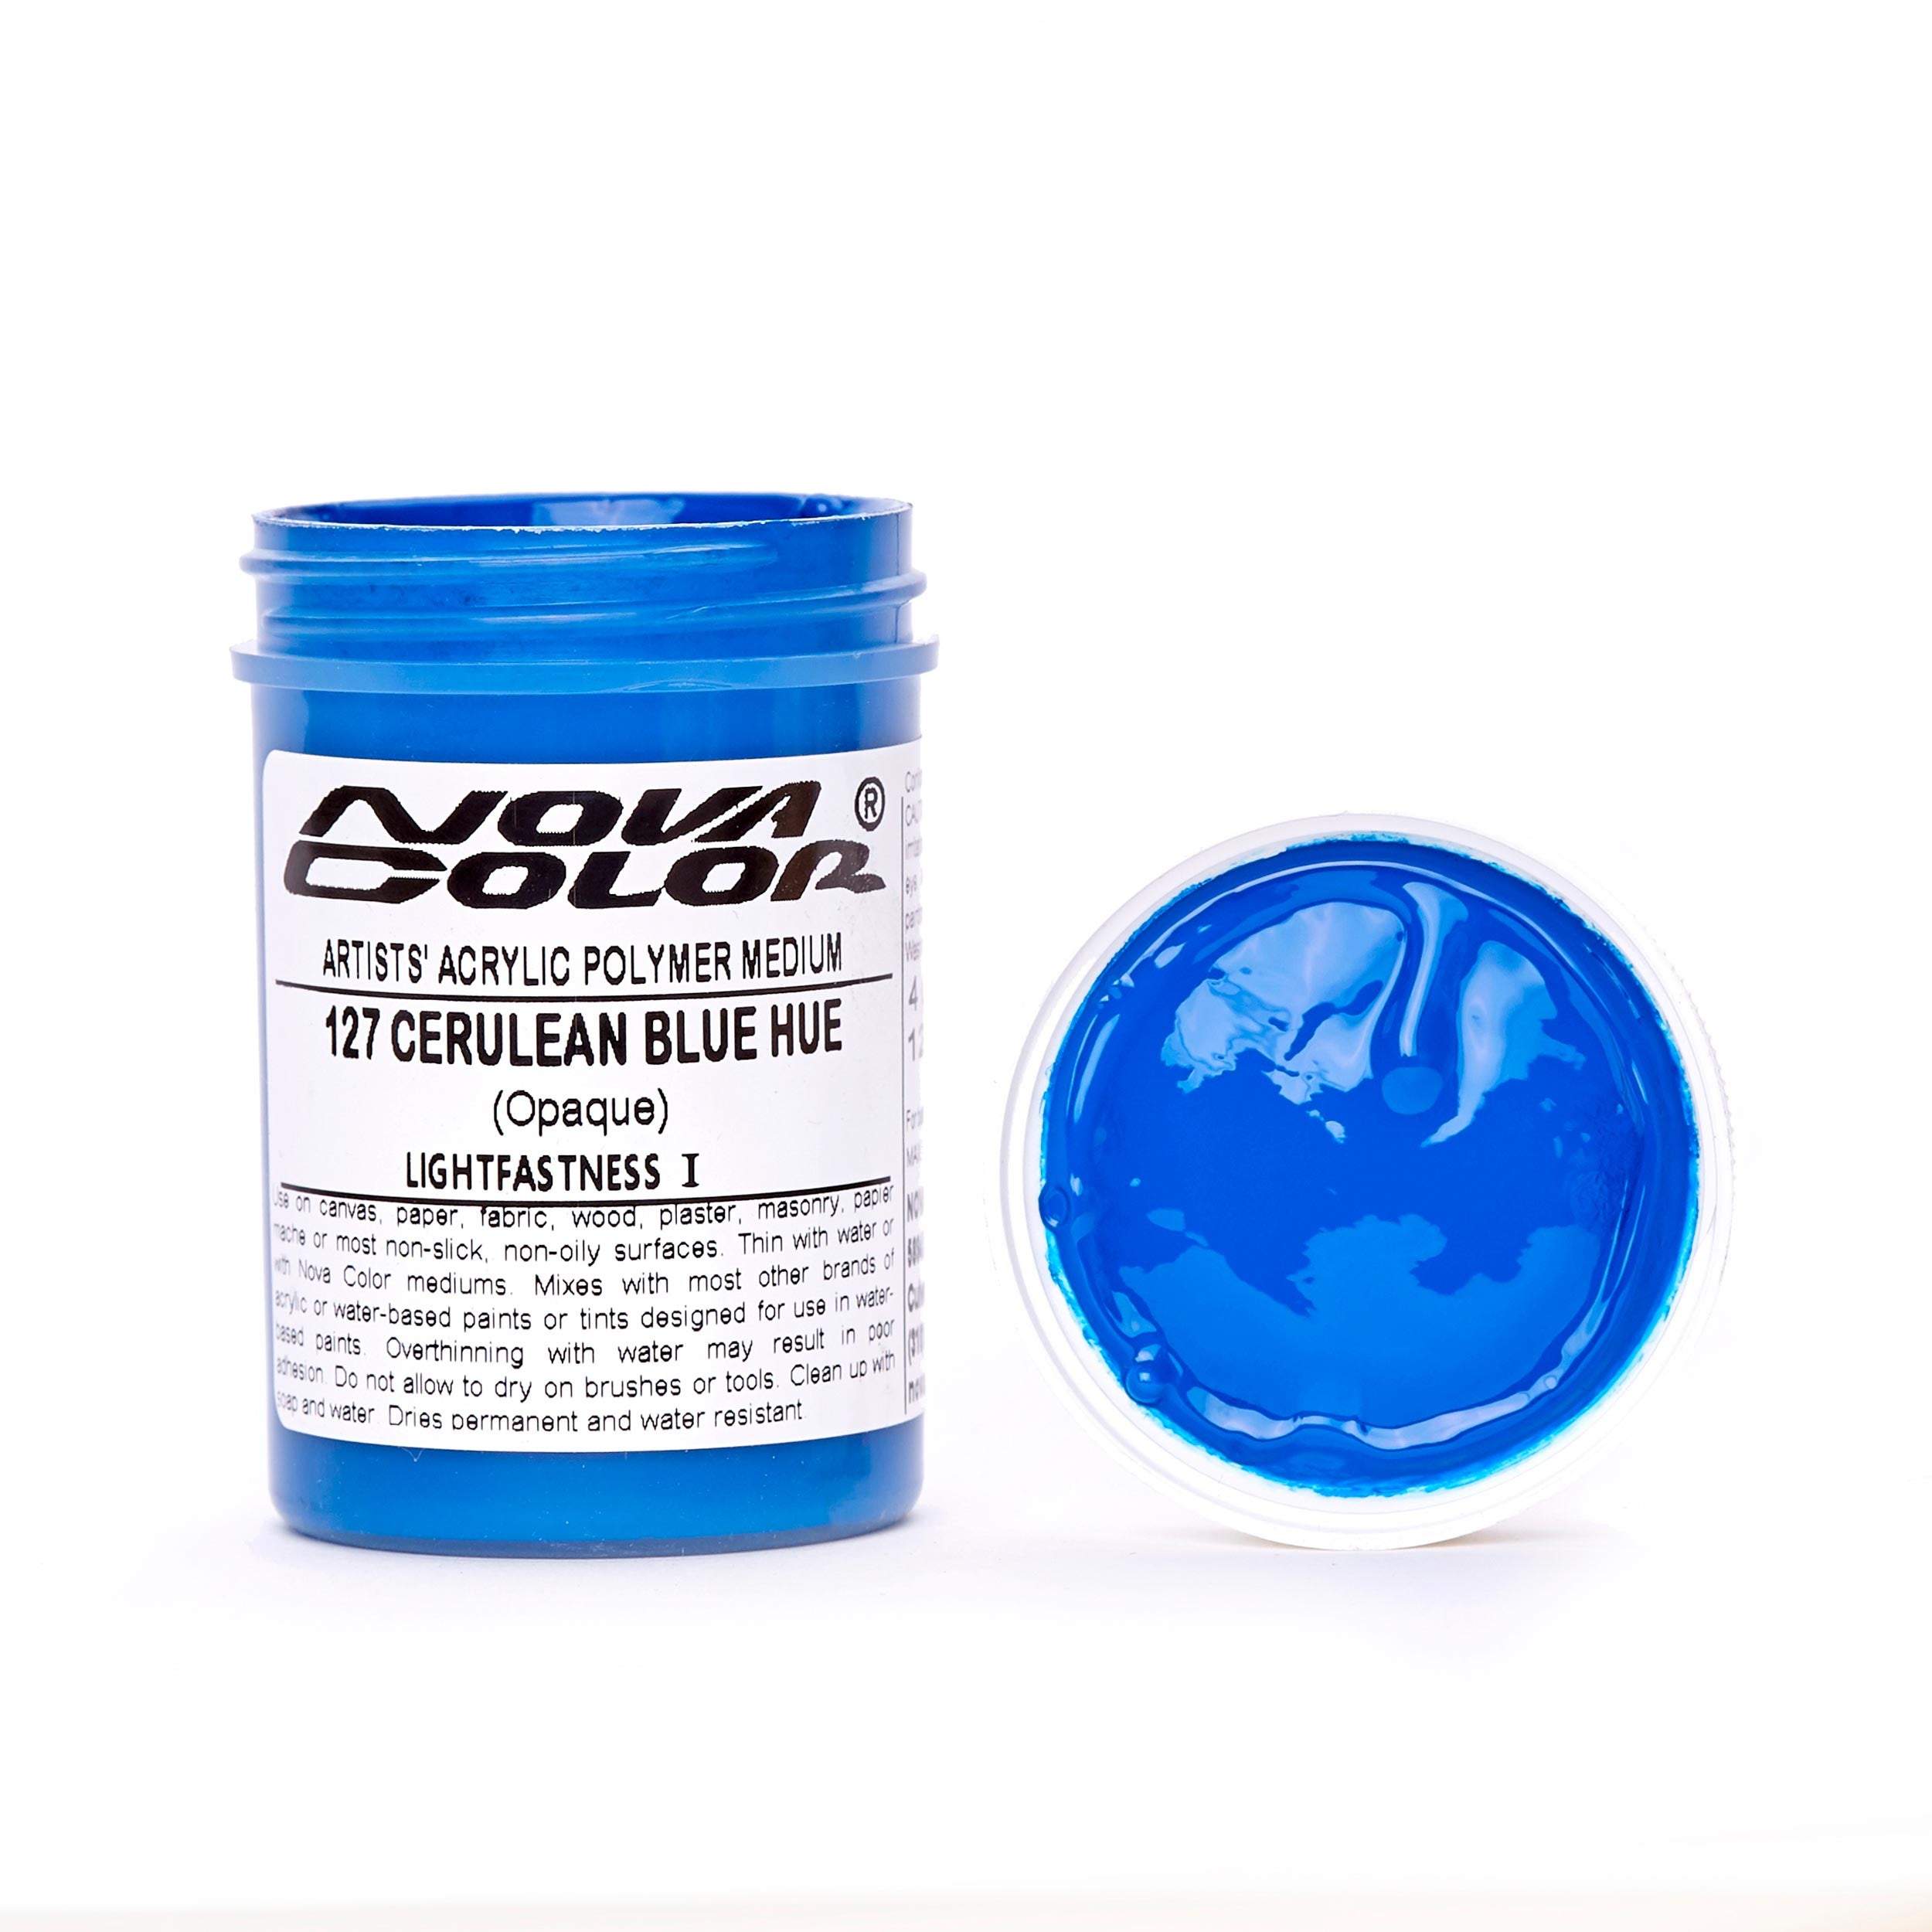 Acrylic Paint on Plastic - Tips for Coating Polymers